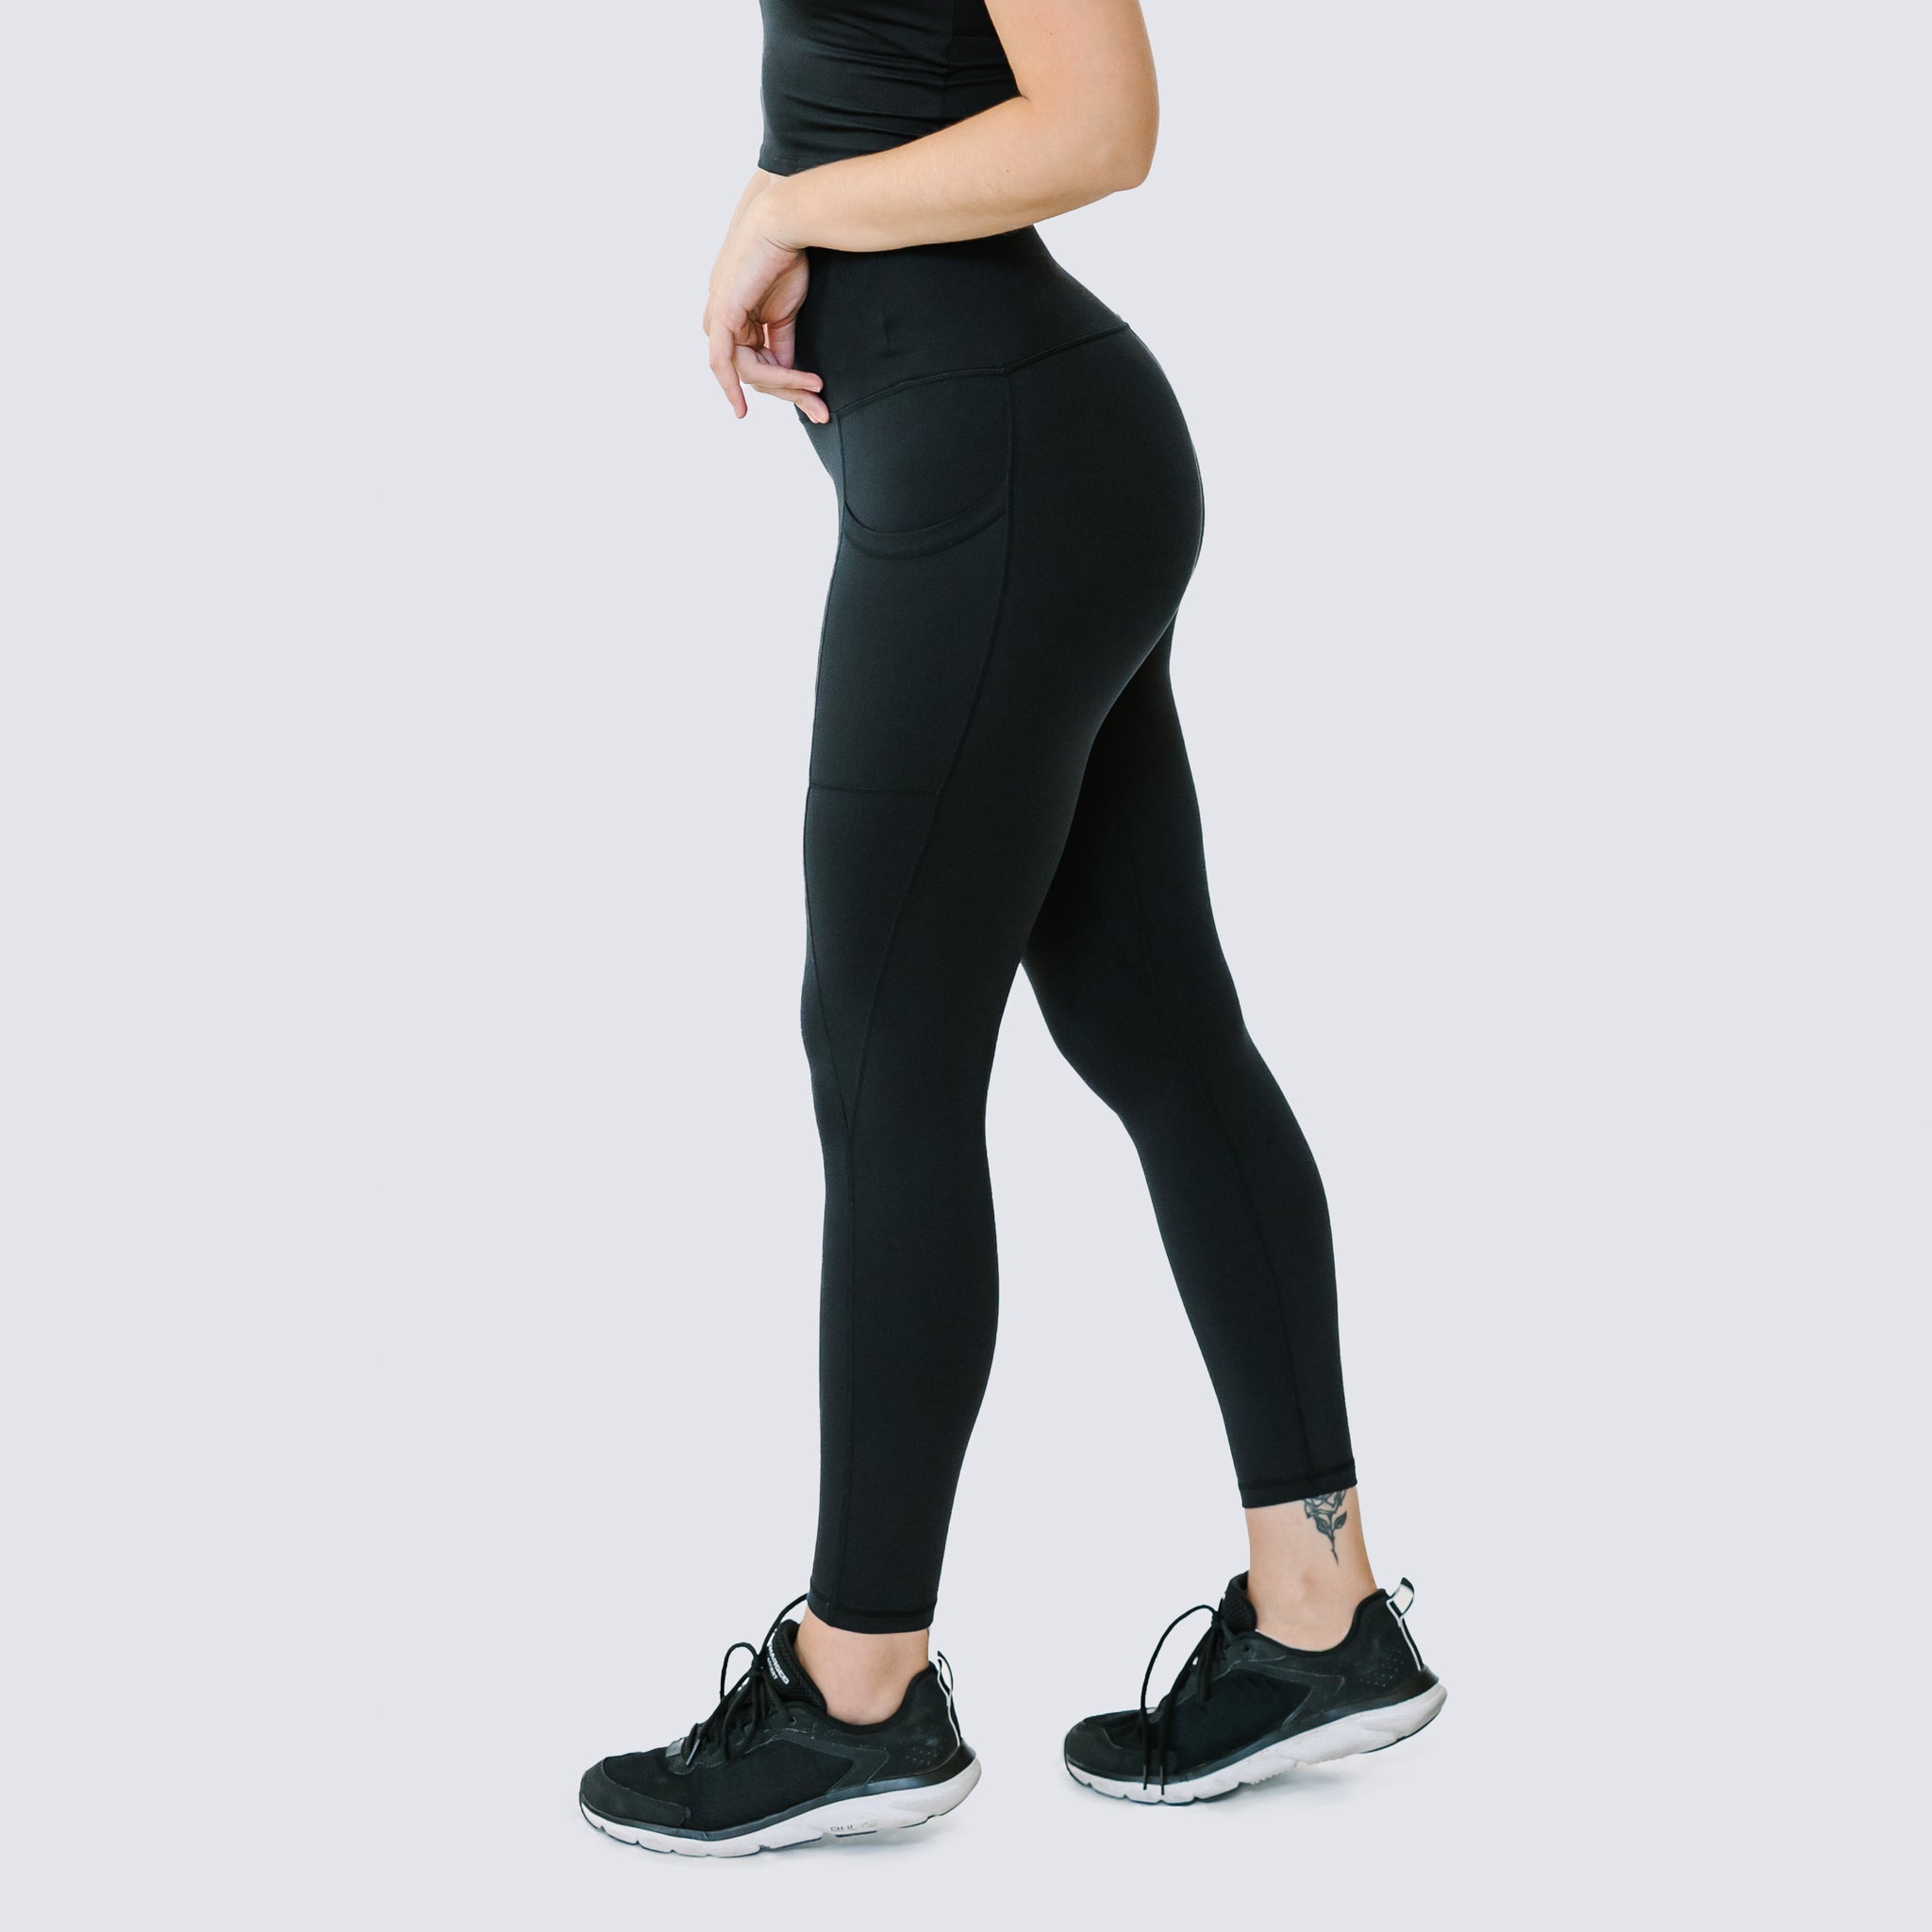 DSF Activewear Women's Cotton Stretch Black Leggings - 2 Pack - Full Length  - Soft Slim Fit at  Women's Clothing store